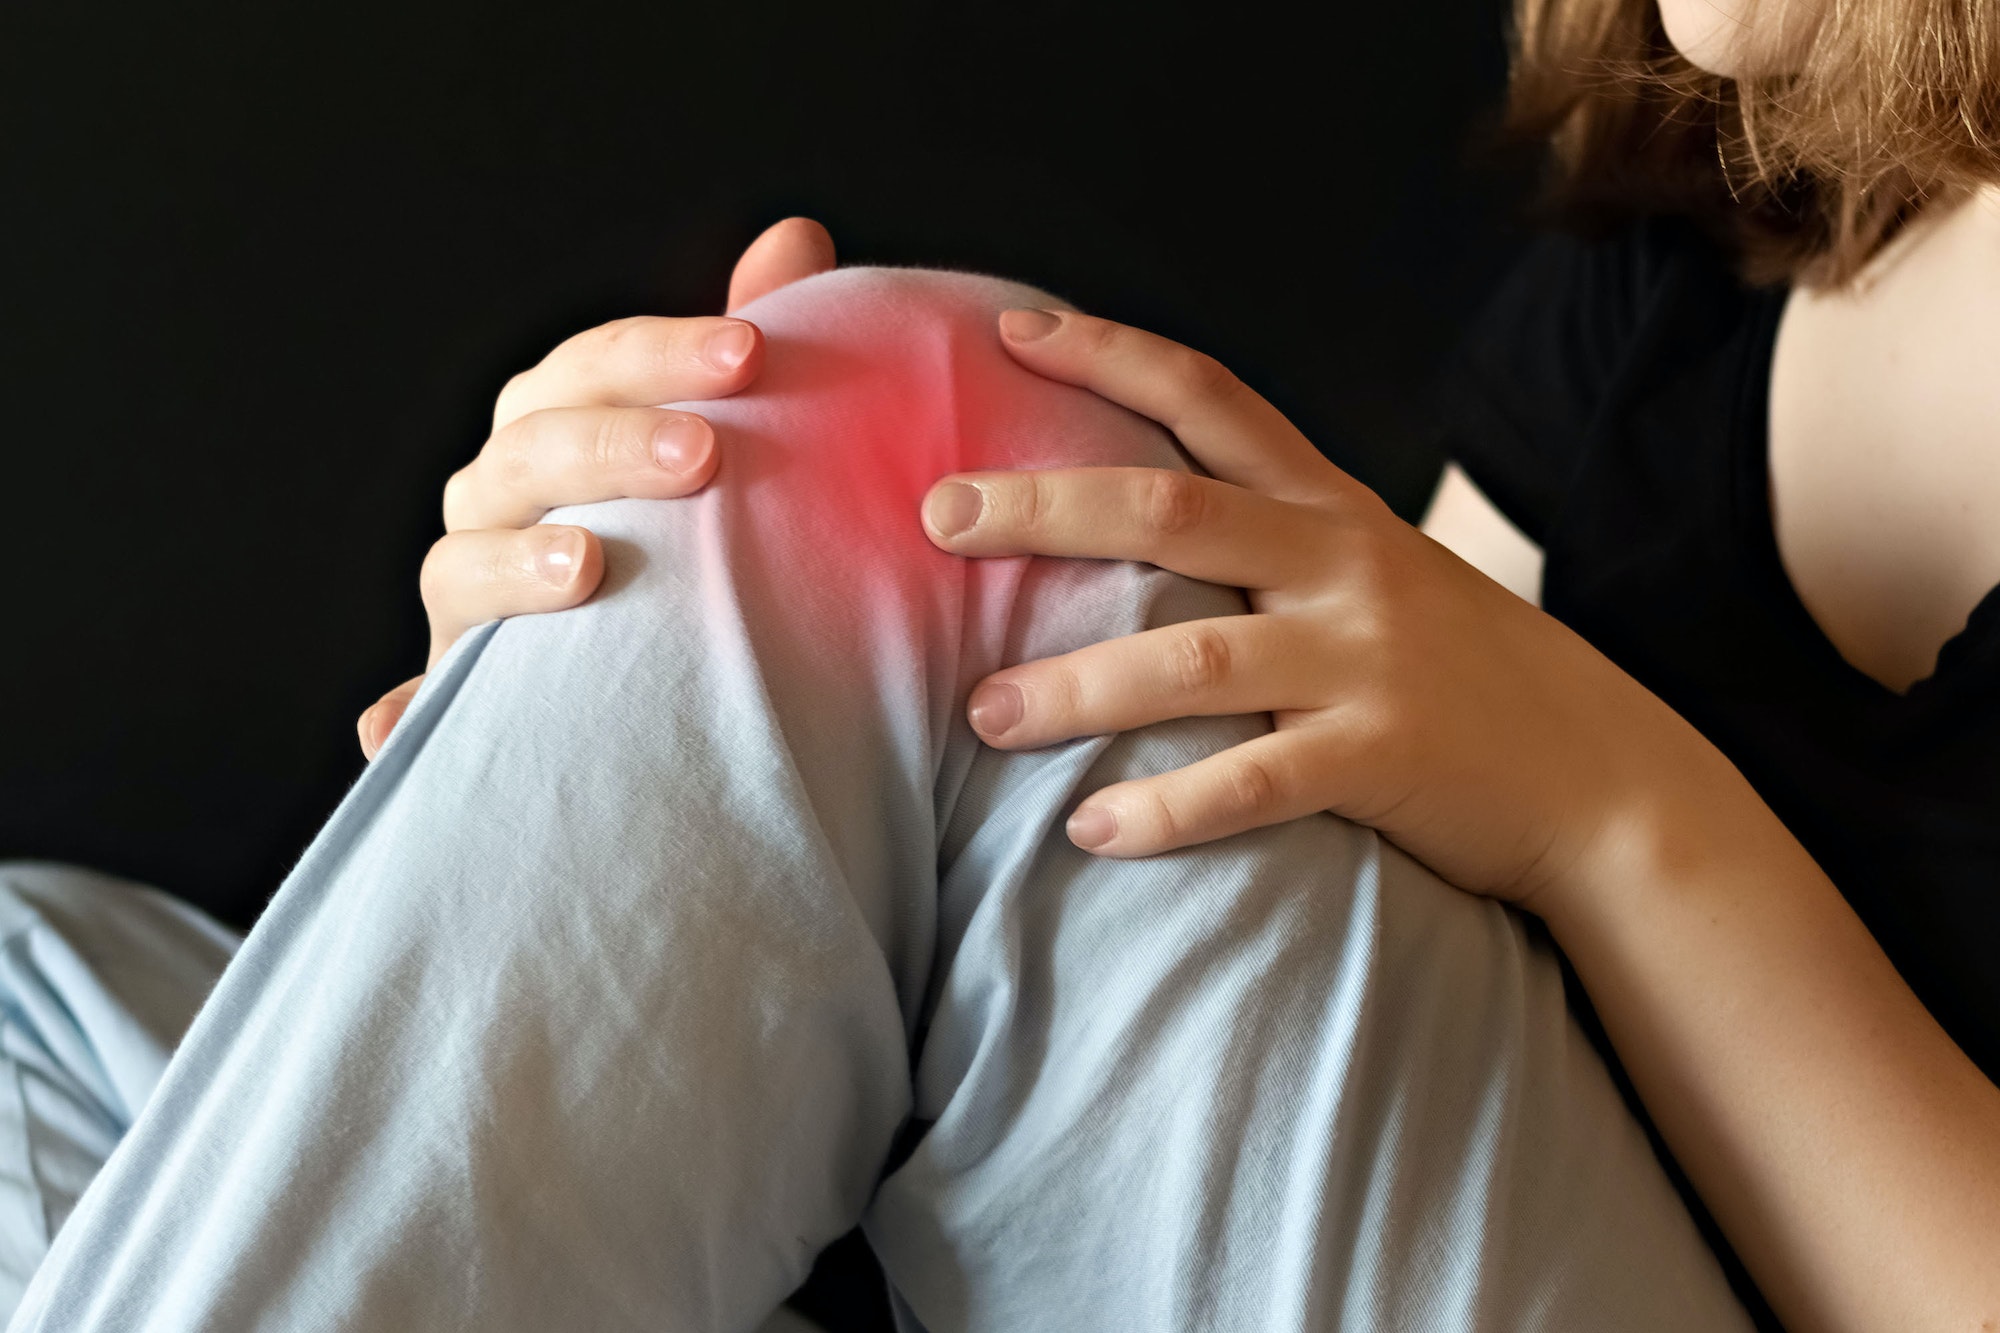 The problem of pain in the knee joint - chronic pain and its management